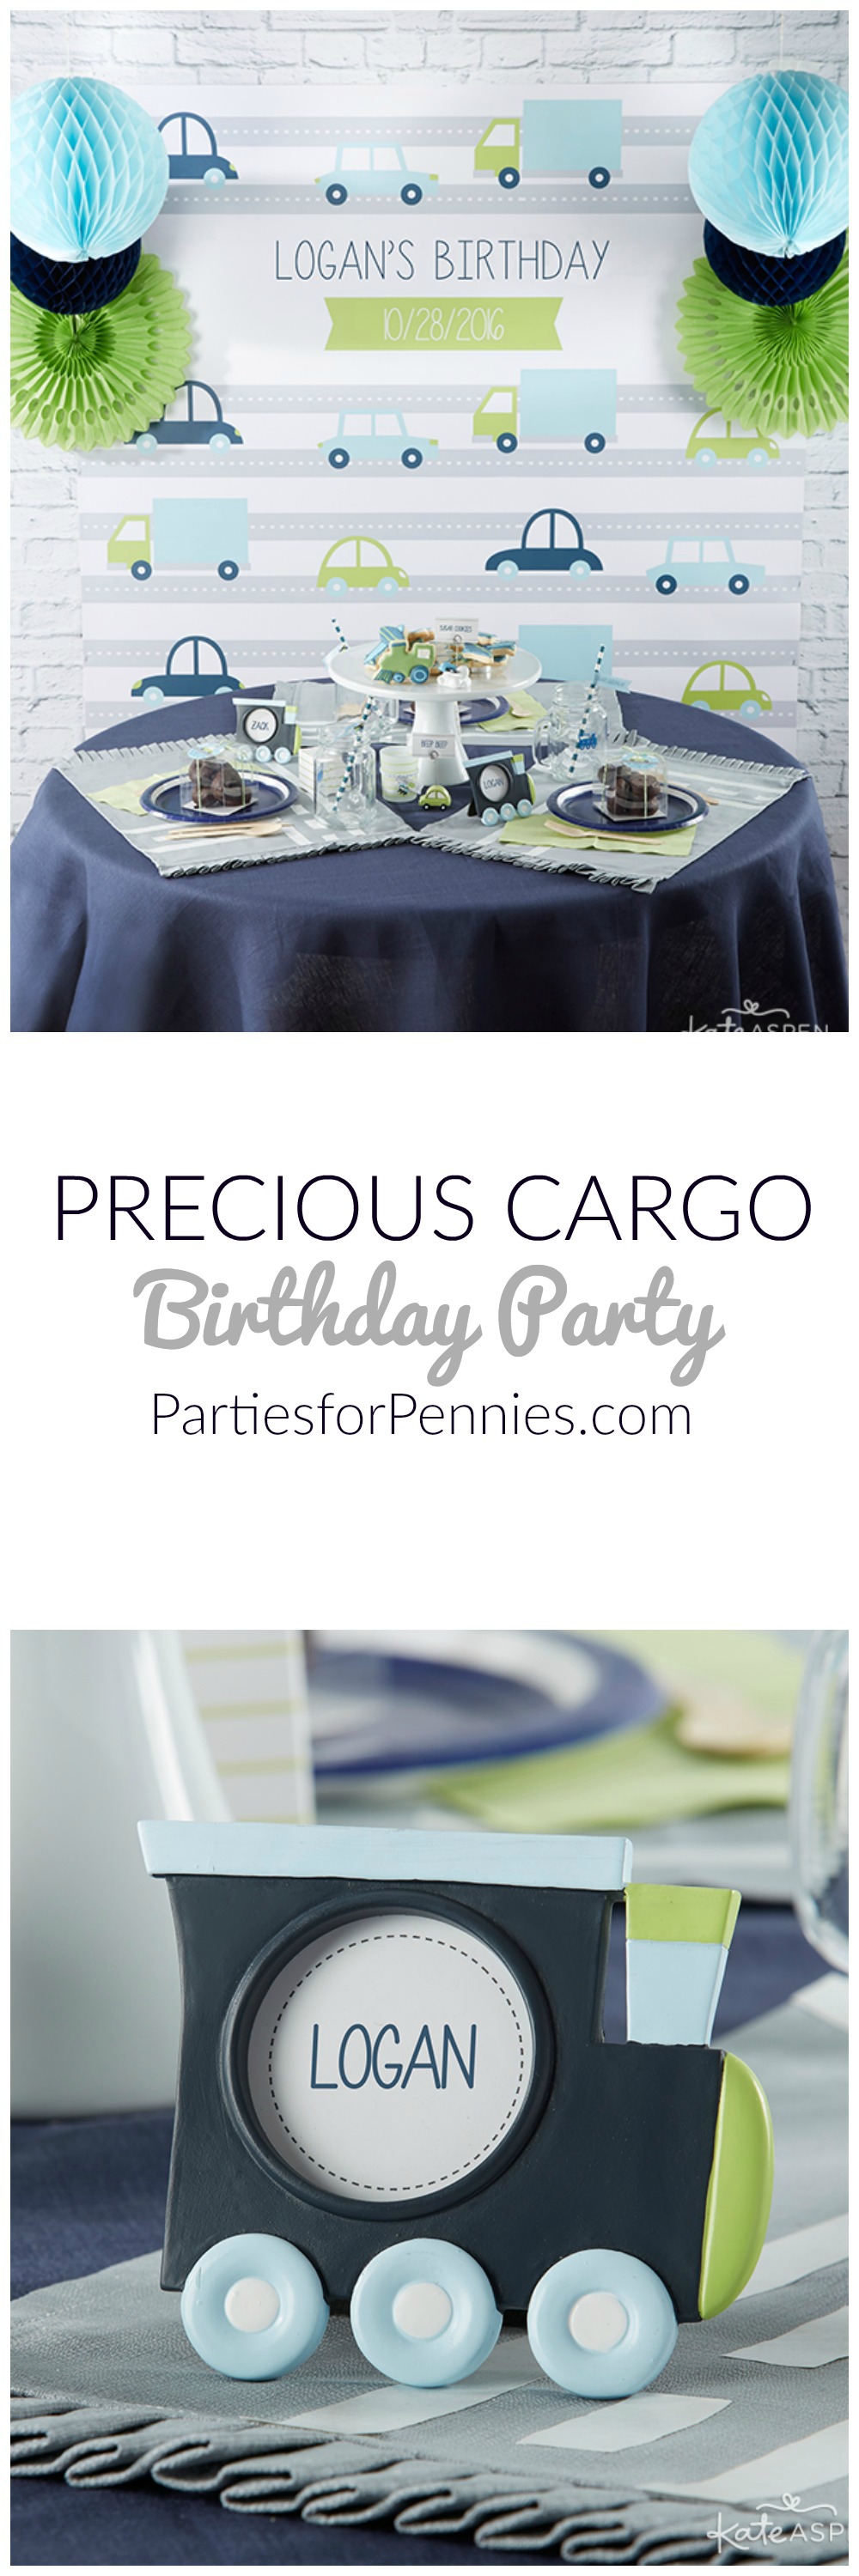 Precious Cargo Birthday Party from Kate Aspen | PartiesforPennies.com | Transportation Party, Plane Party, Train Party, Car Party, 1st Birthday Party